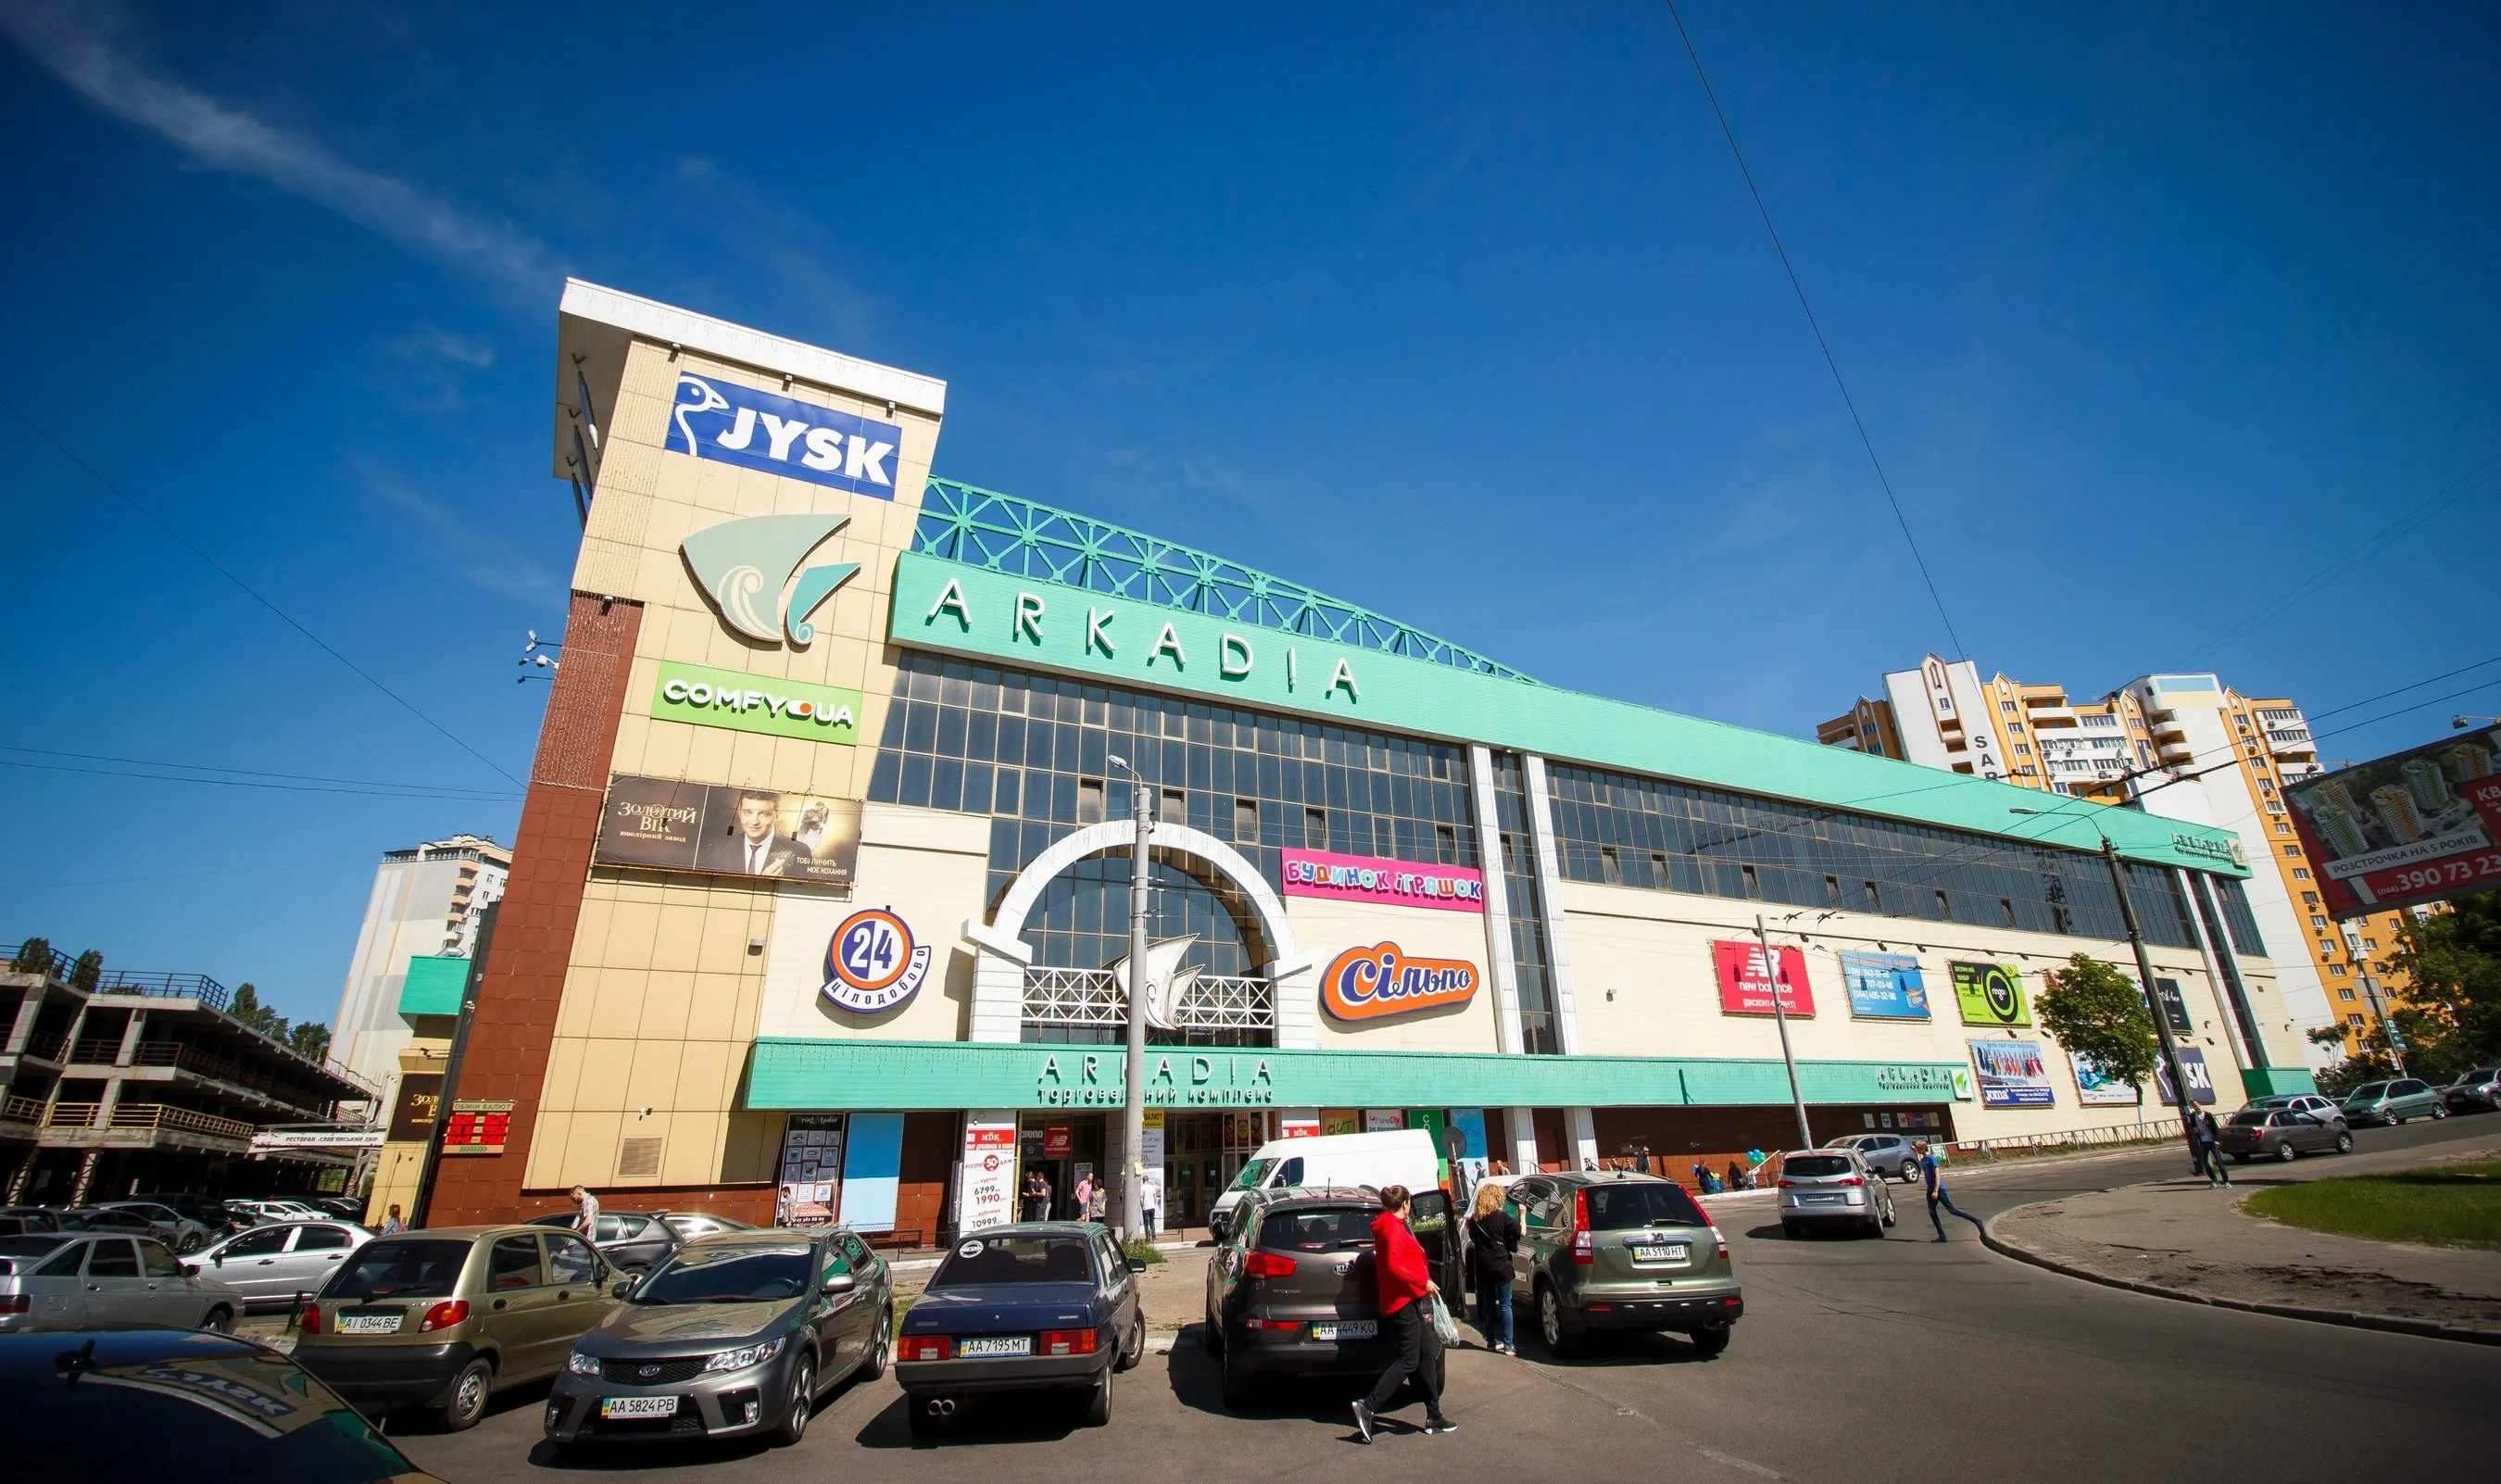 Shopping Center Arkady in Ukraine, europe | Sporting Equipment,Handbags,Shoes,Clothes,Home Decor,Natural Beauty Products,Cosmetics,Swimwear - Country Helper